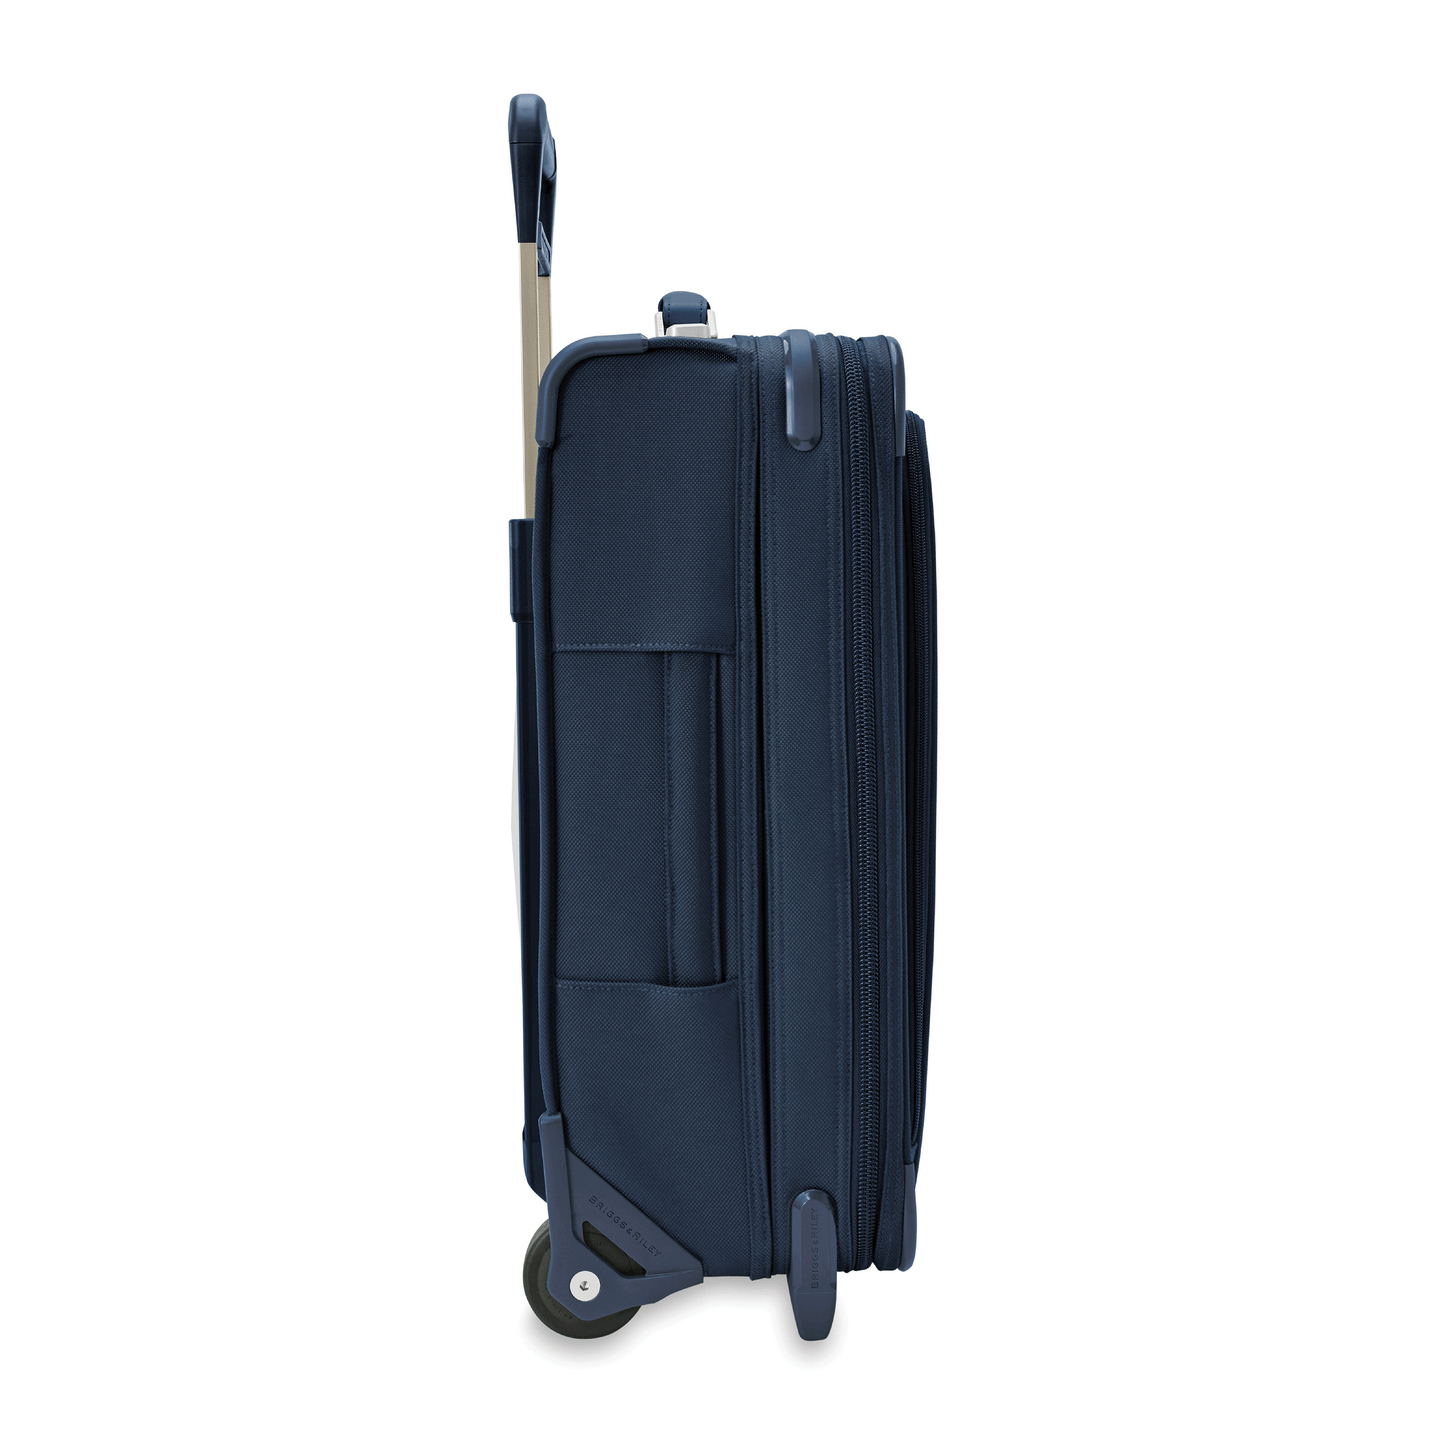 Briggs & Riley Baseline Essential Carry-On 2 Wheel Upright (US size)